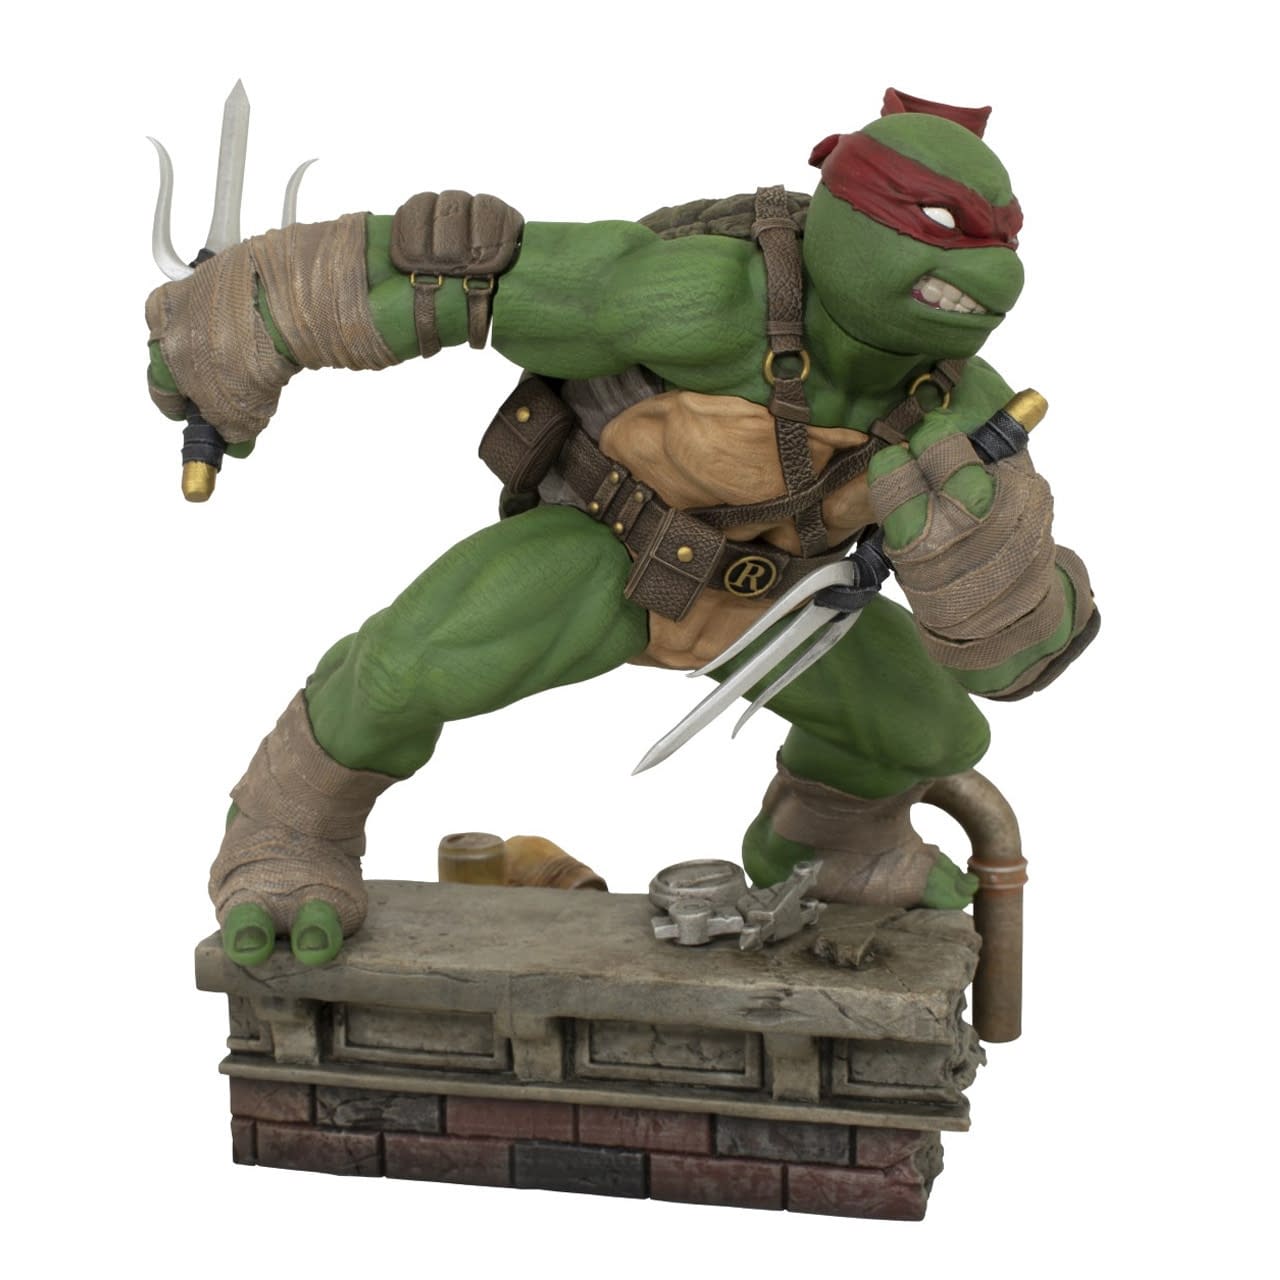 Diamond Select Debuts New Statues for TMNT and Green Hornet 